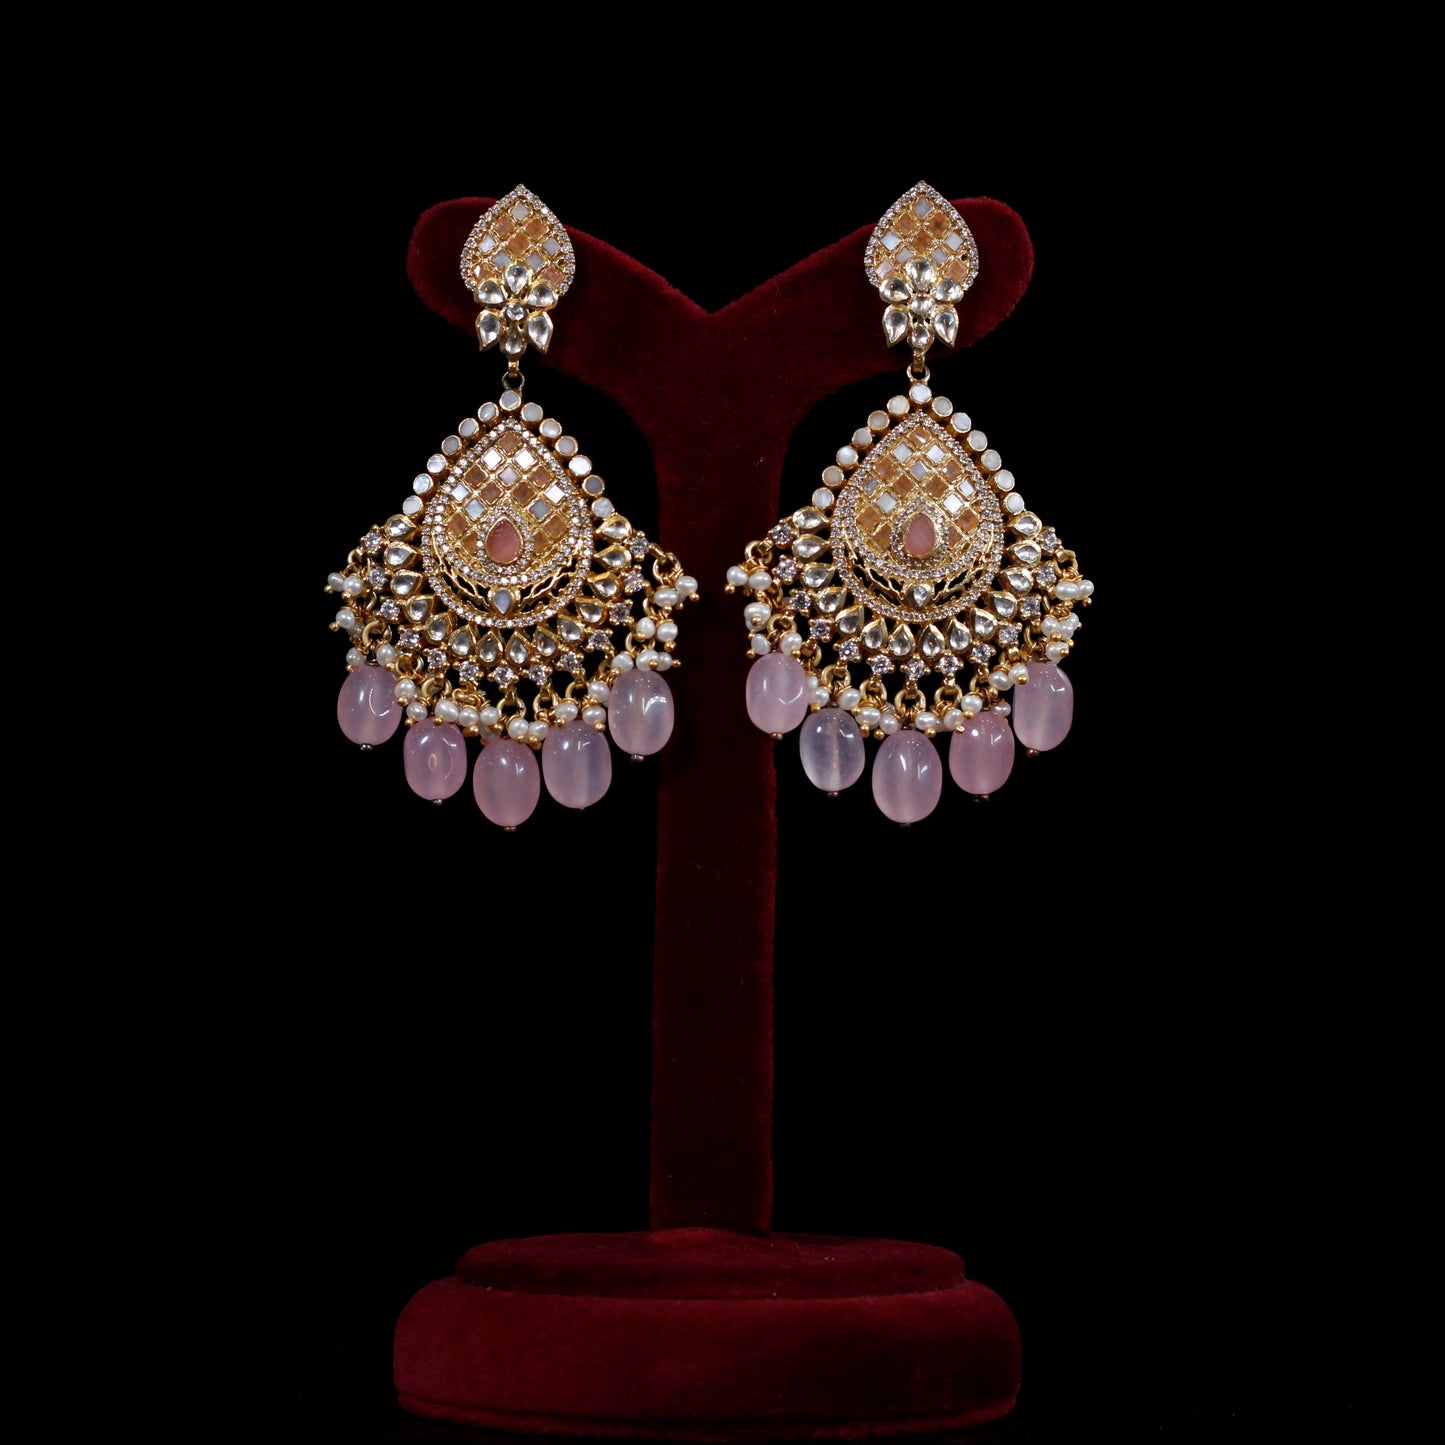 EARRINGS- 92.5 STERLING SILVER GOLD PLATED,  SUN stones, ZIRCONIA, KUNDAN, ROSE QUARTZ WITH FRESH WATER PEARLS.